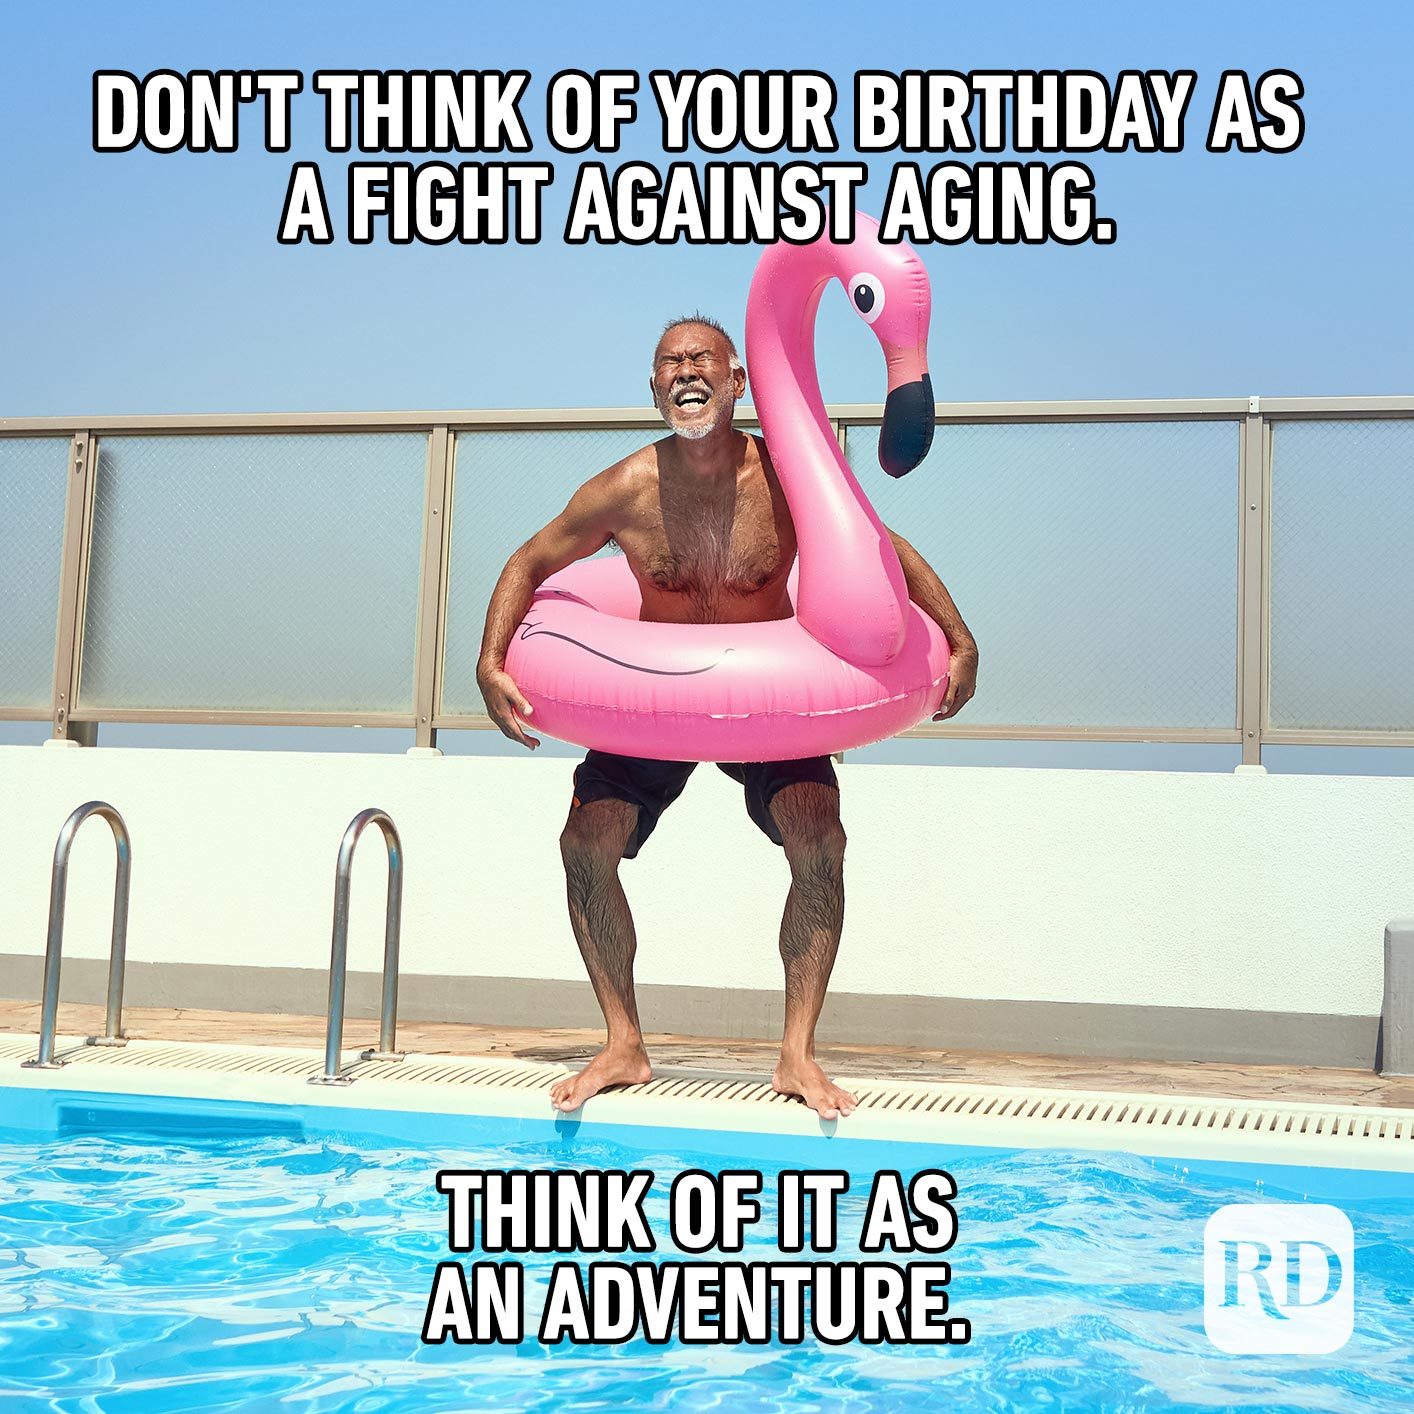 Don't think of your birthday as a fight against aging. Think of it as an adventure. 